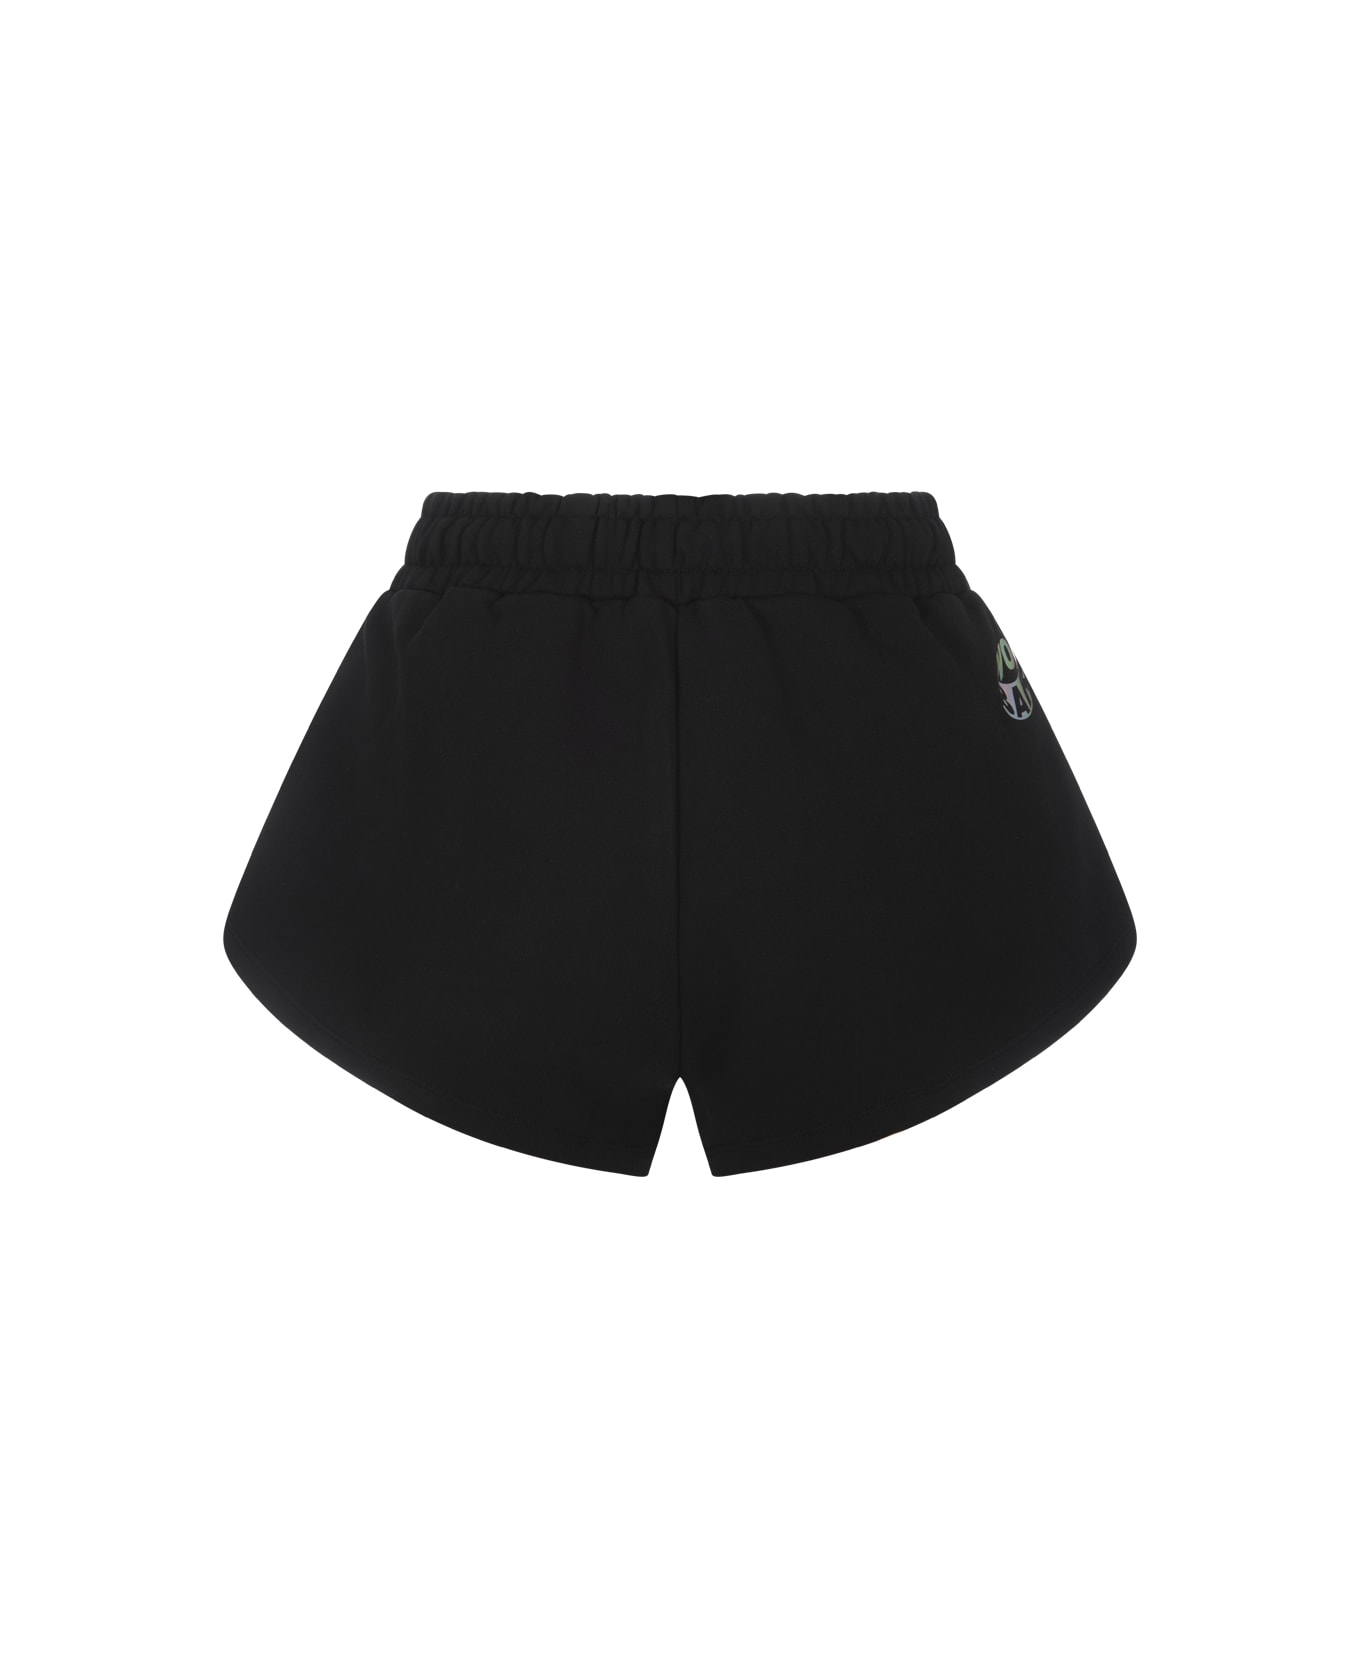 Barrow Black Crop Shorts With Smile Patch - Black ショートパンツ